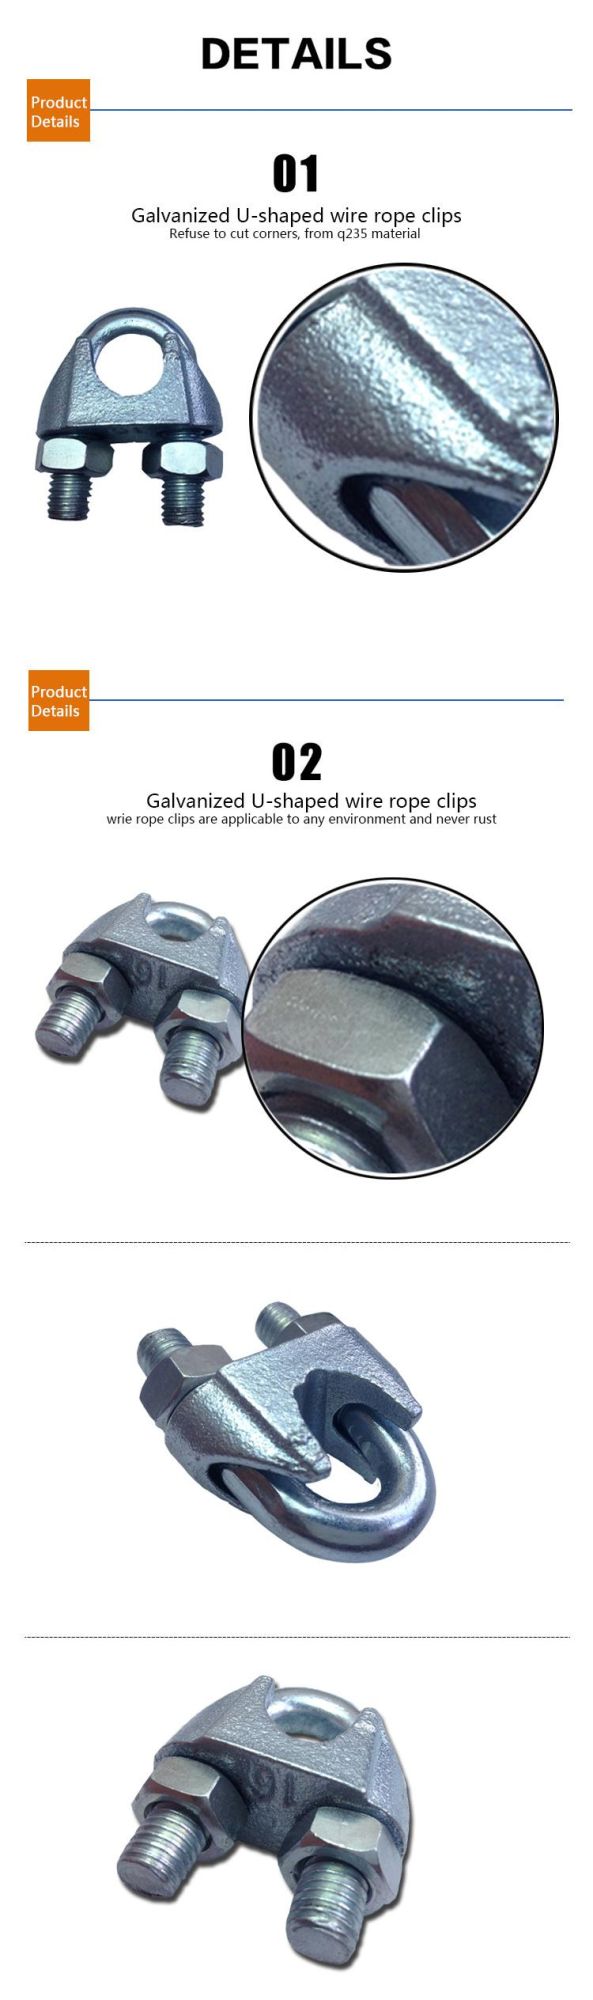 E. G. Malleable DIN741 Wire Rope Clips